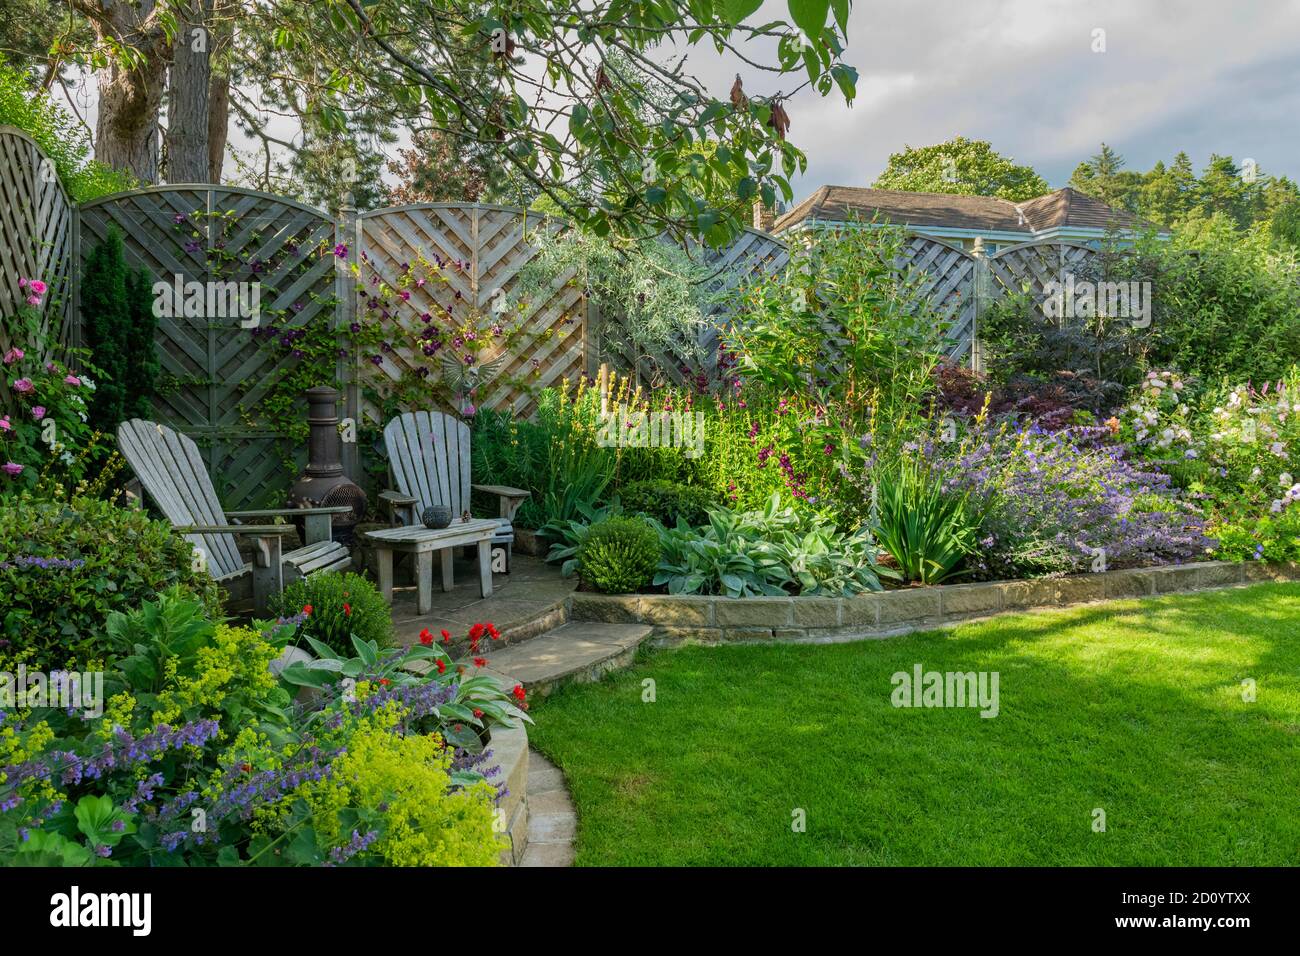 Landscaped sunny private garden (contemporary design, colourful summer flowers, border plants, patio furniture seating, lawn) - Yorkshire, England, UK Stock Photo